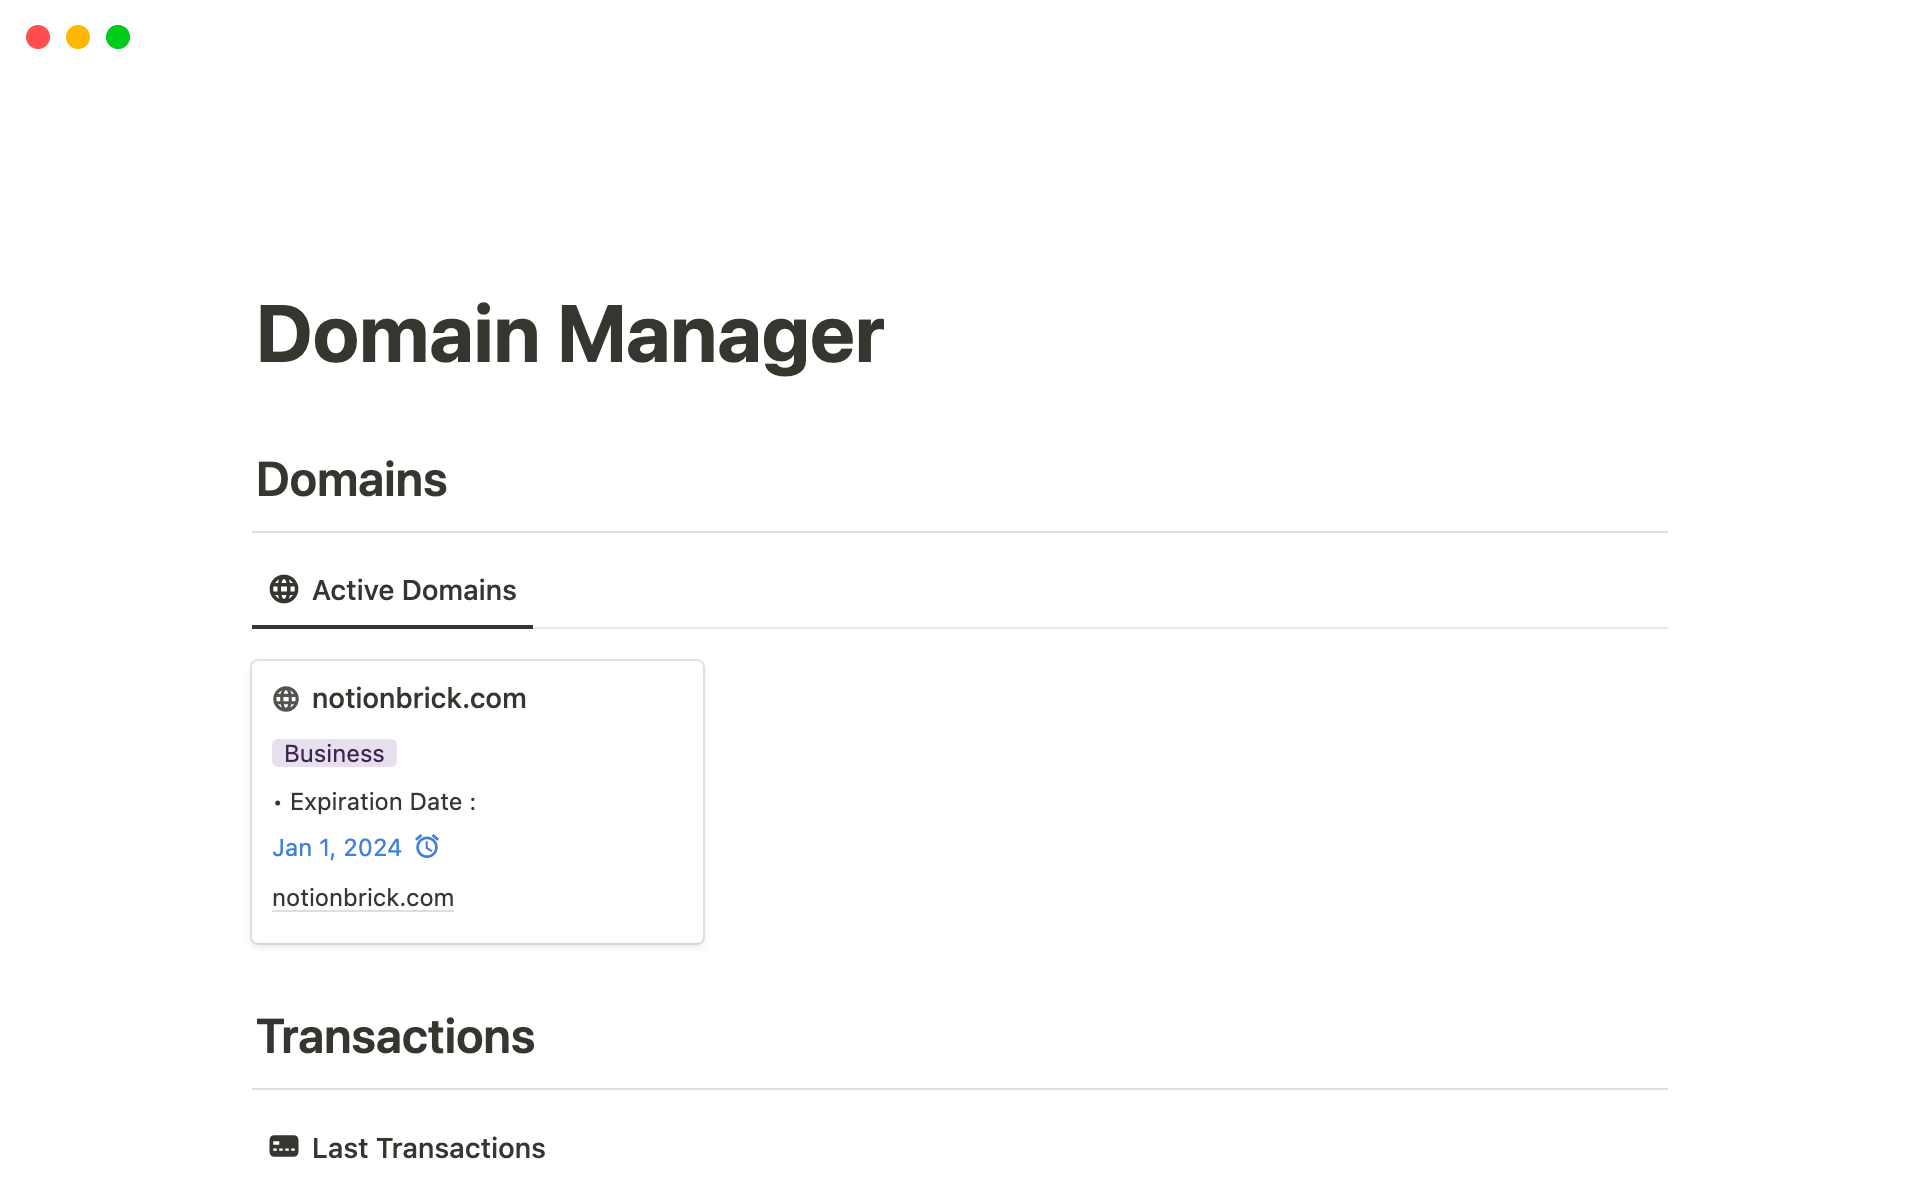 How to find out my domain manager